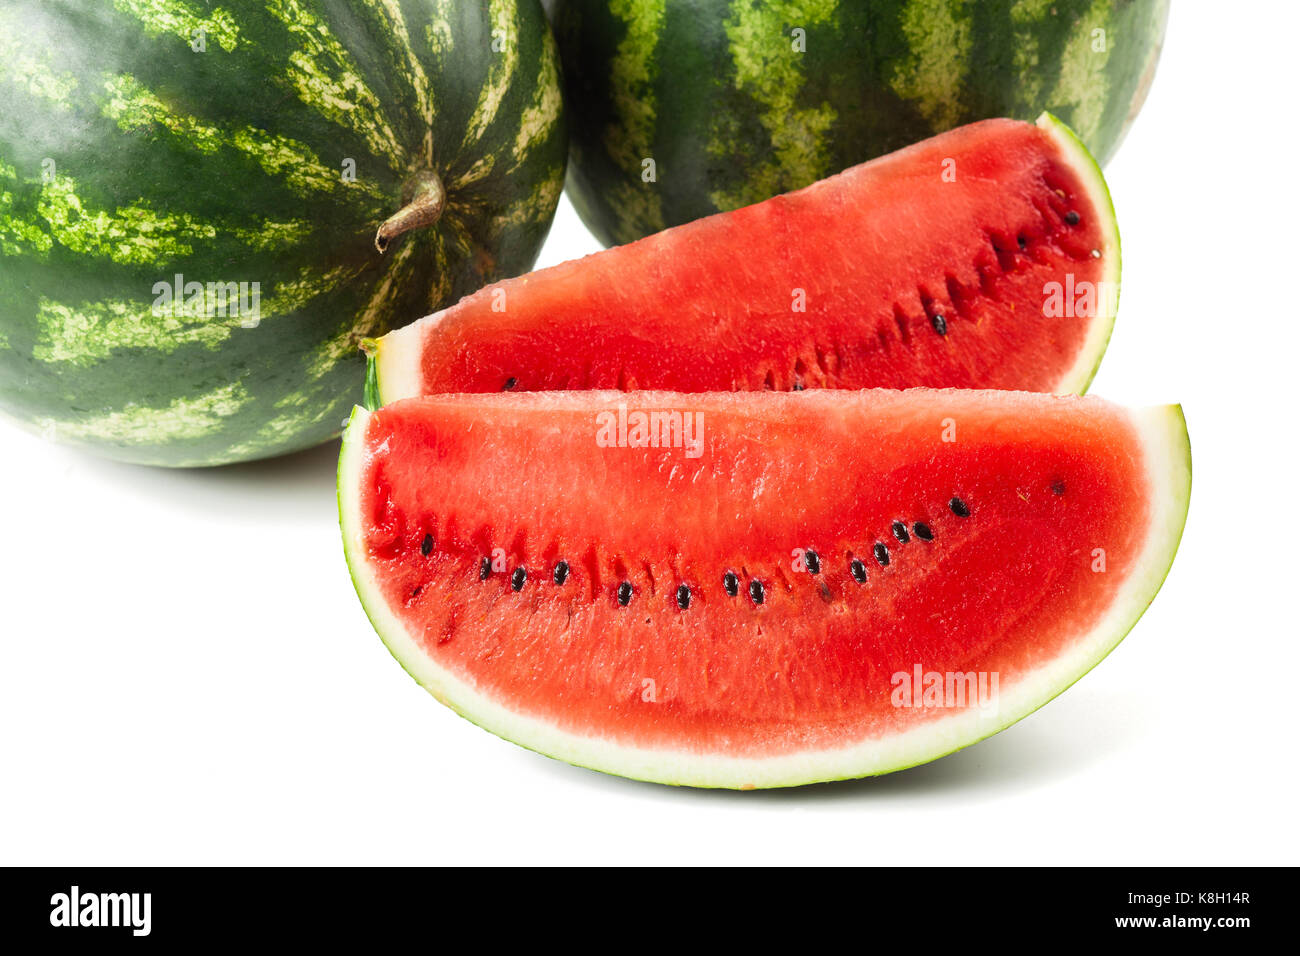 Ripe juicy watermelons isolated on white background Stock Photo